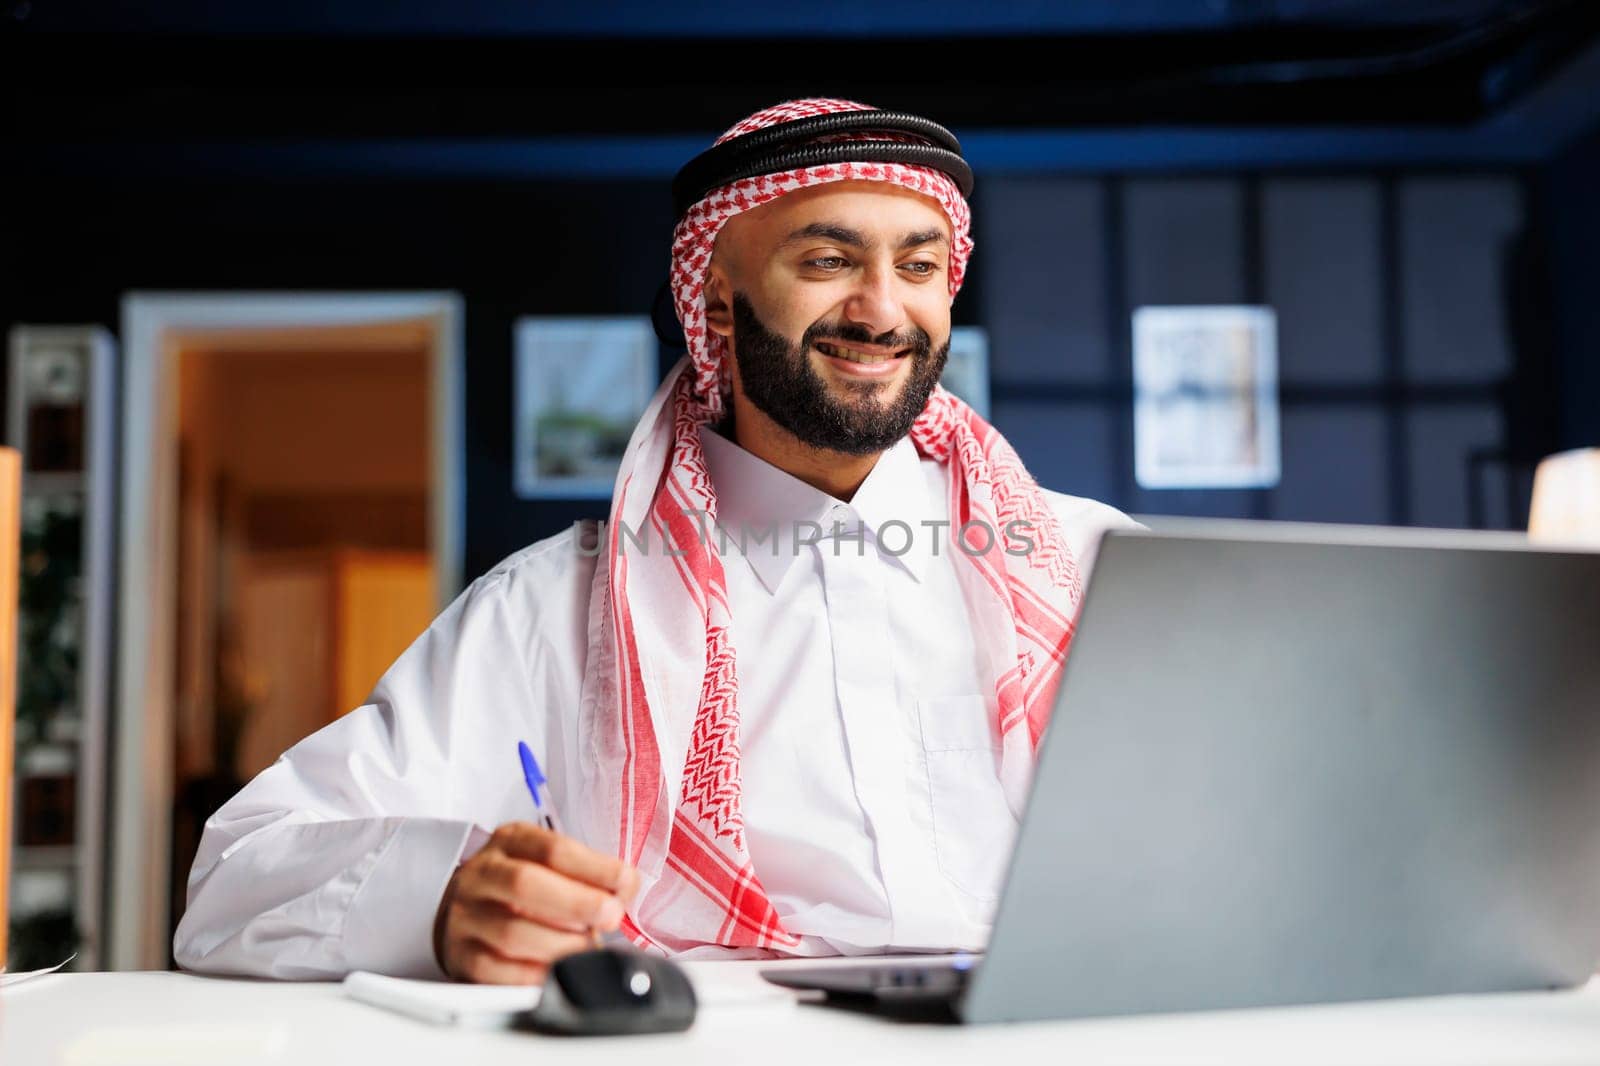 Smiling Arab guy works diligently at office desk, engages in digital tasks and writes on his notepad with laptop nearby. He efficiently conducts online research, embodying dedication and productivity.